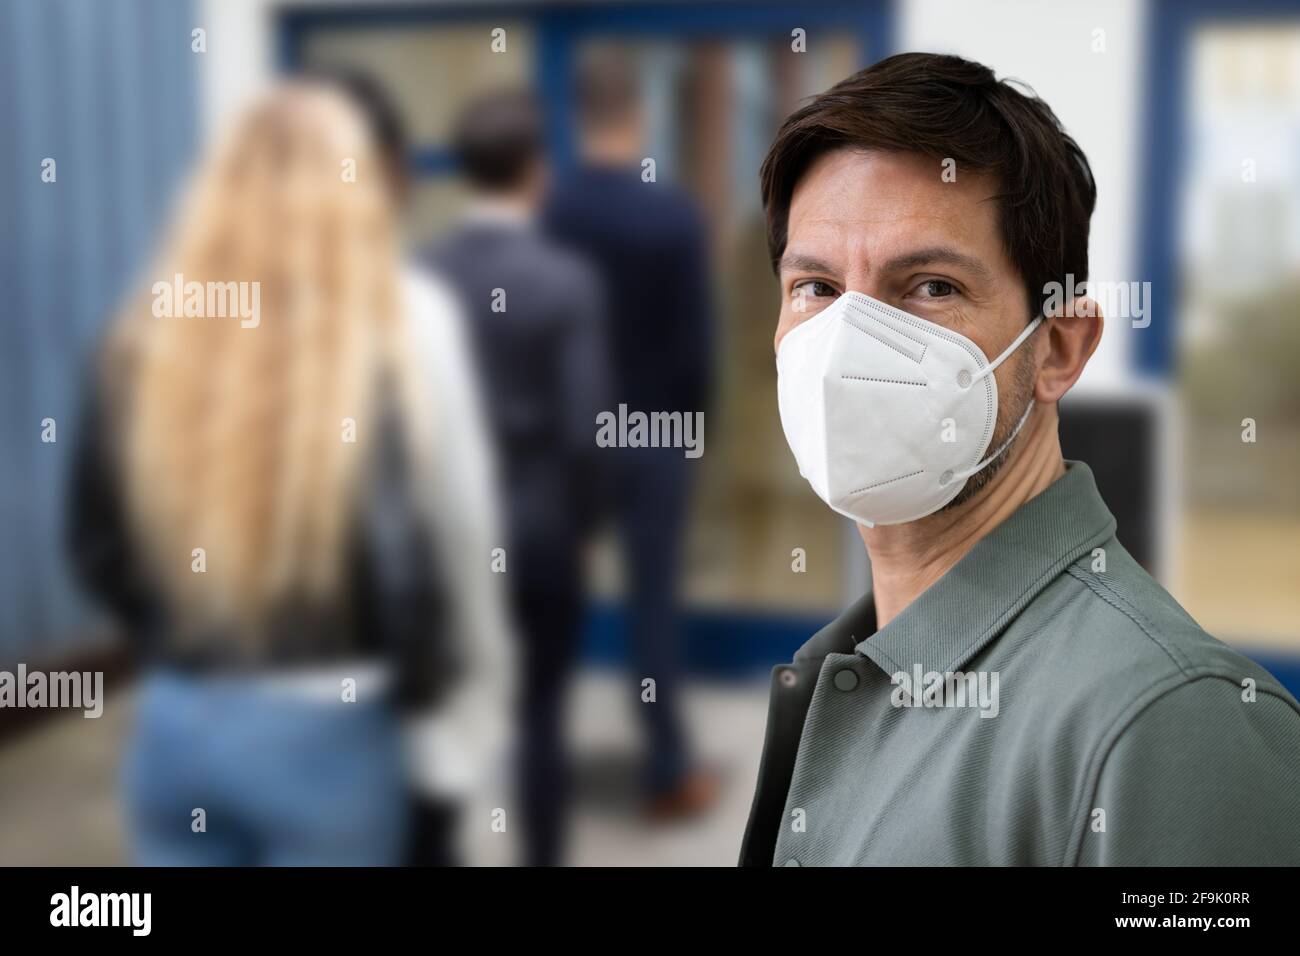 Unemployed Line Or Queue In Covid Face Mask Stock Photo